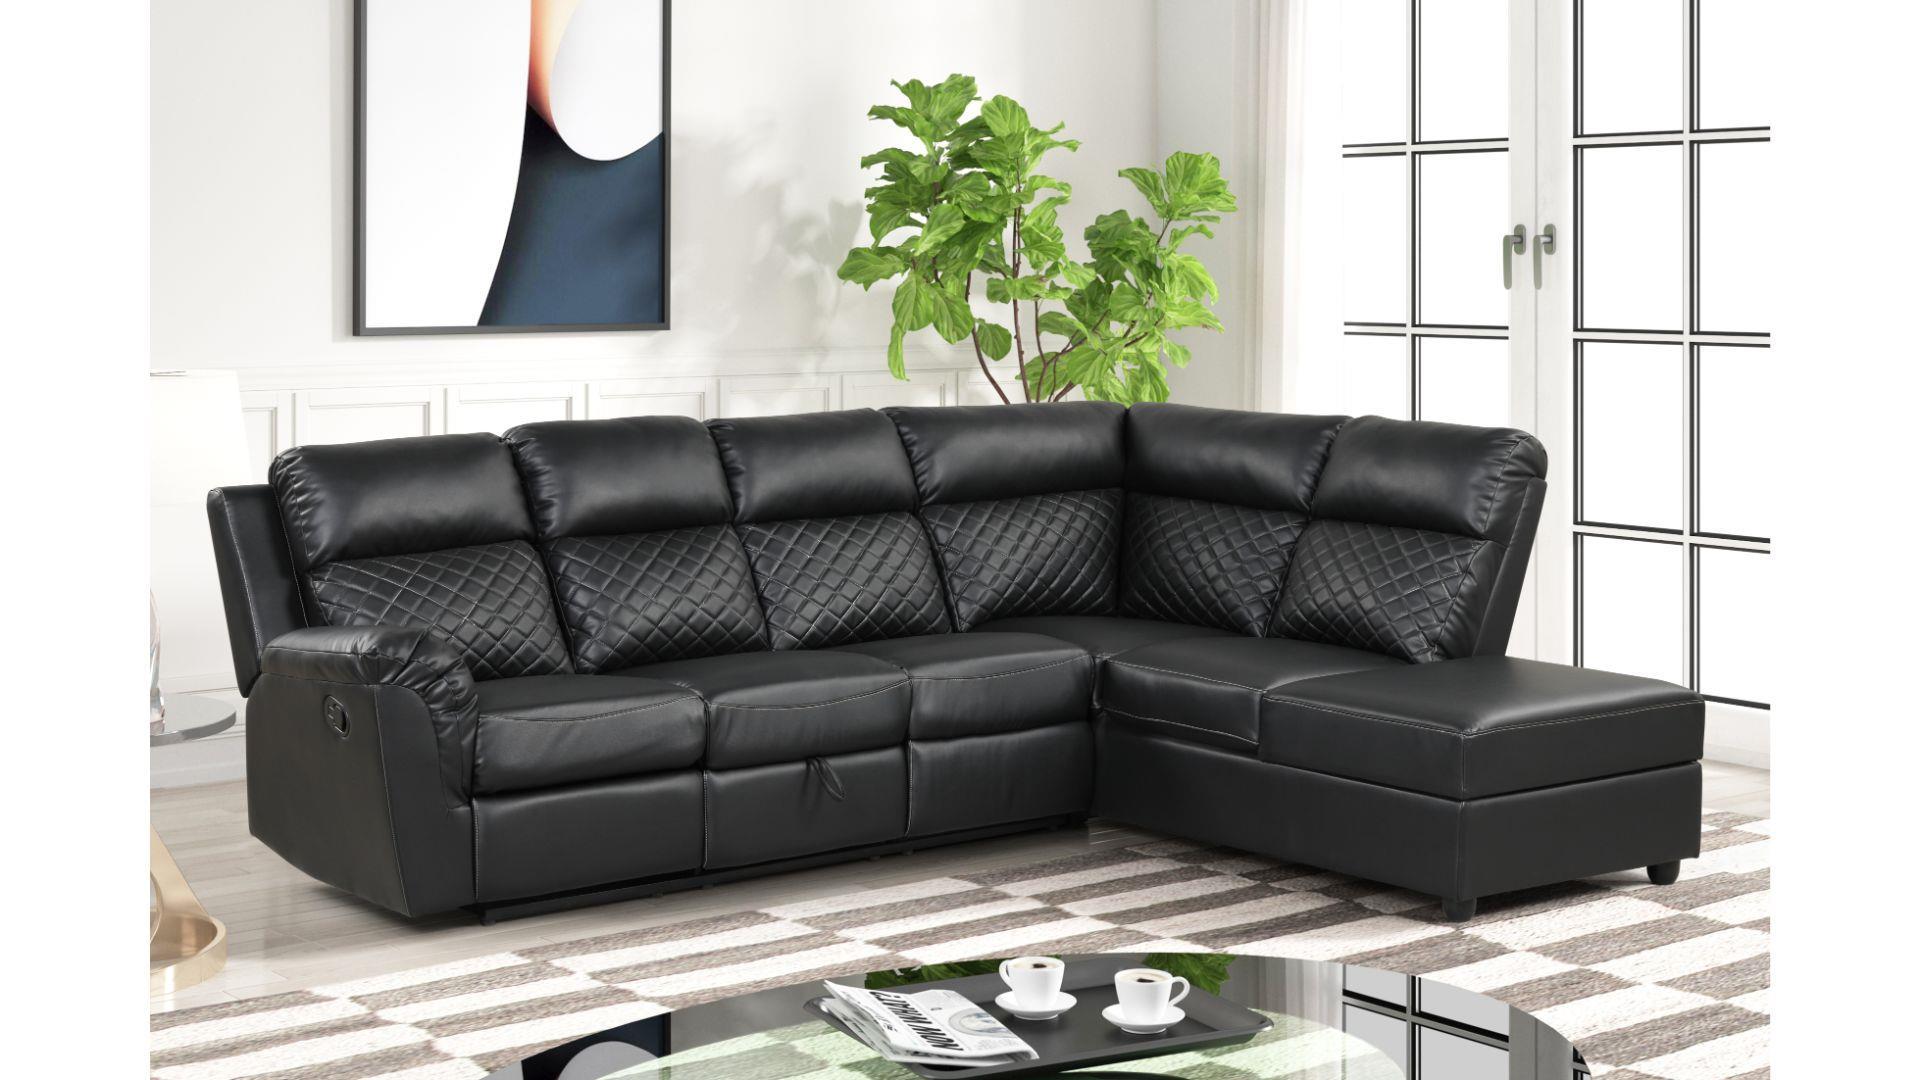 Contemporary, Modern Recliner Sectional CHARLOTTE-BK CHARLOTTE-BK in Black Eco Leather